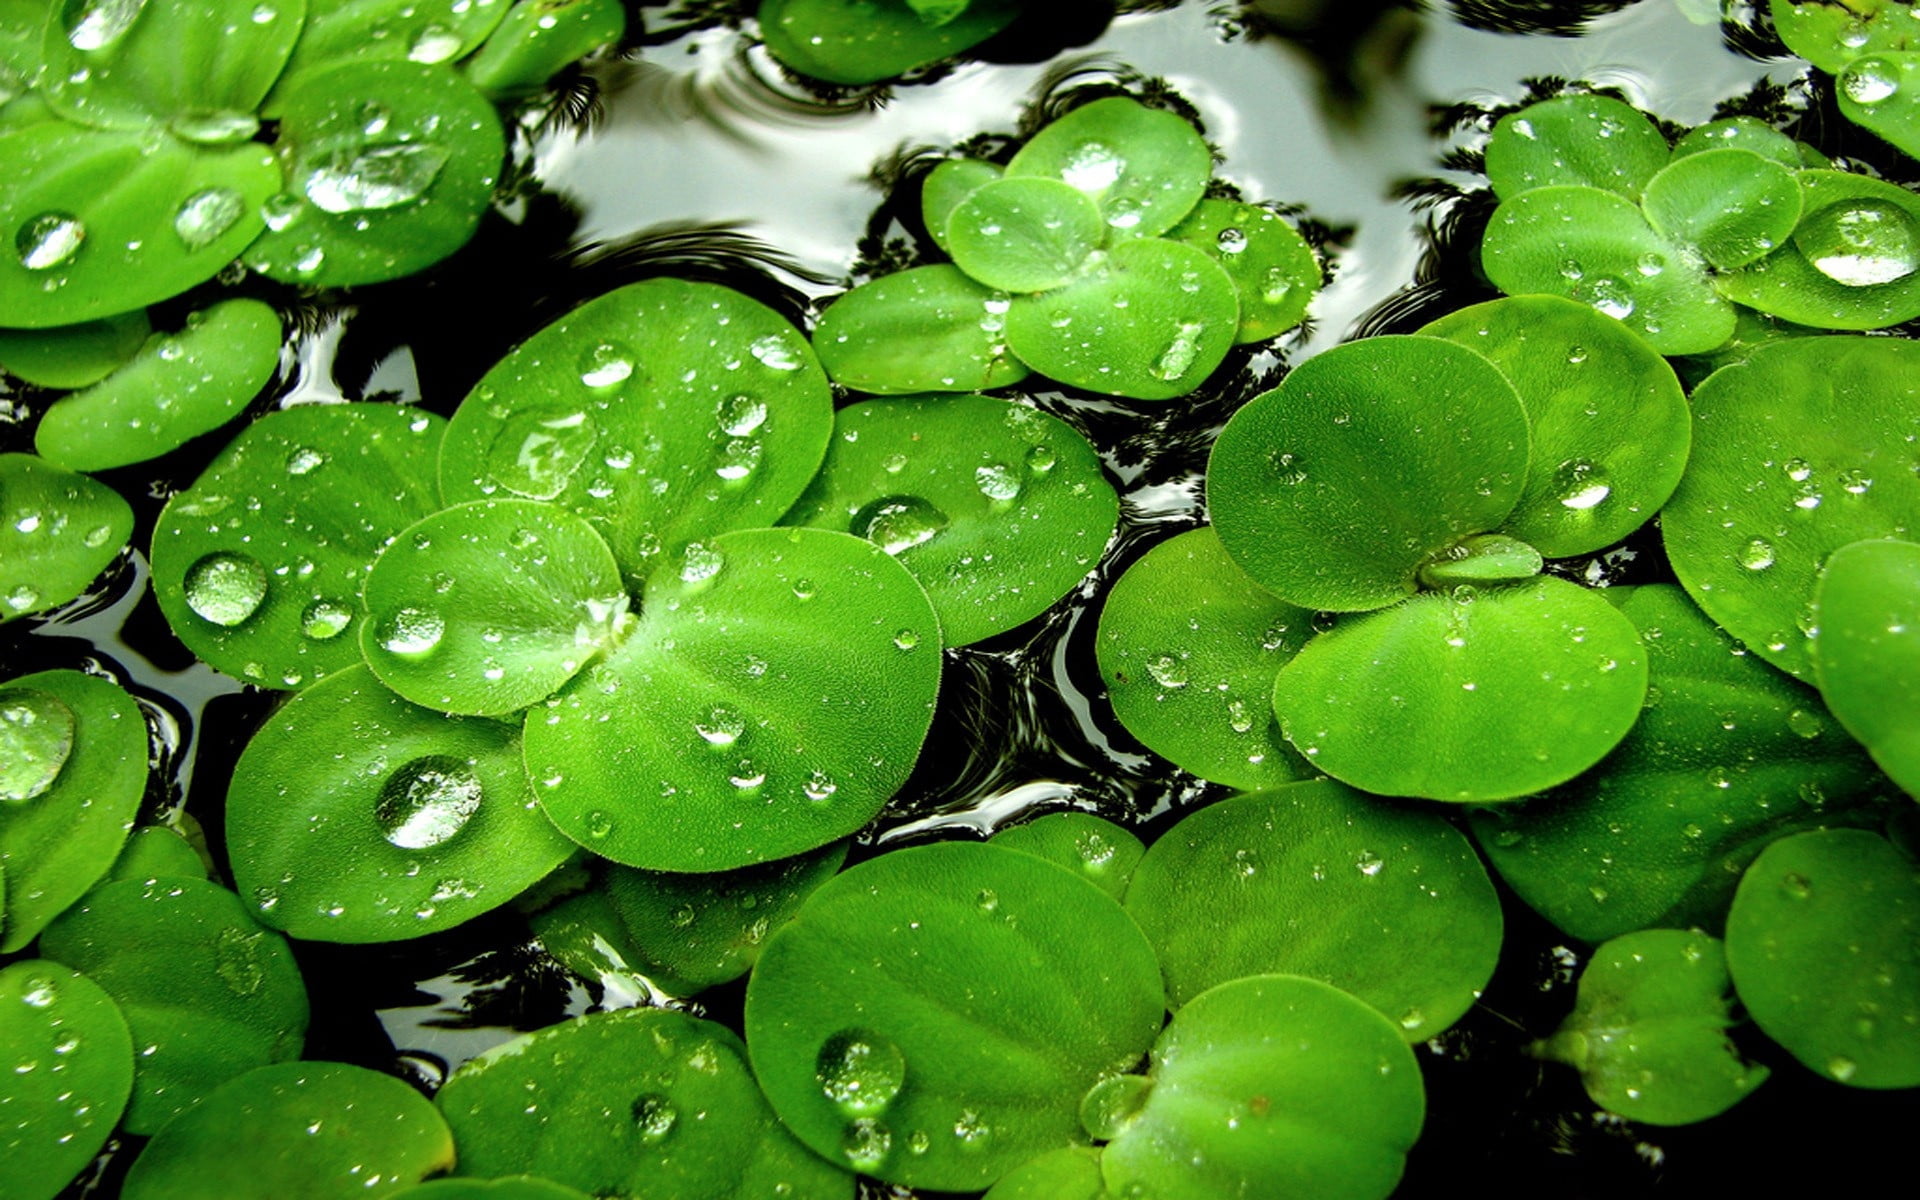 green lotus leaves, grass, moisture, water, droplets, nature